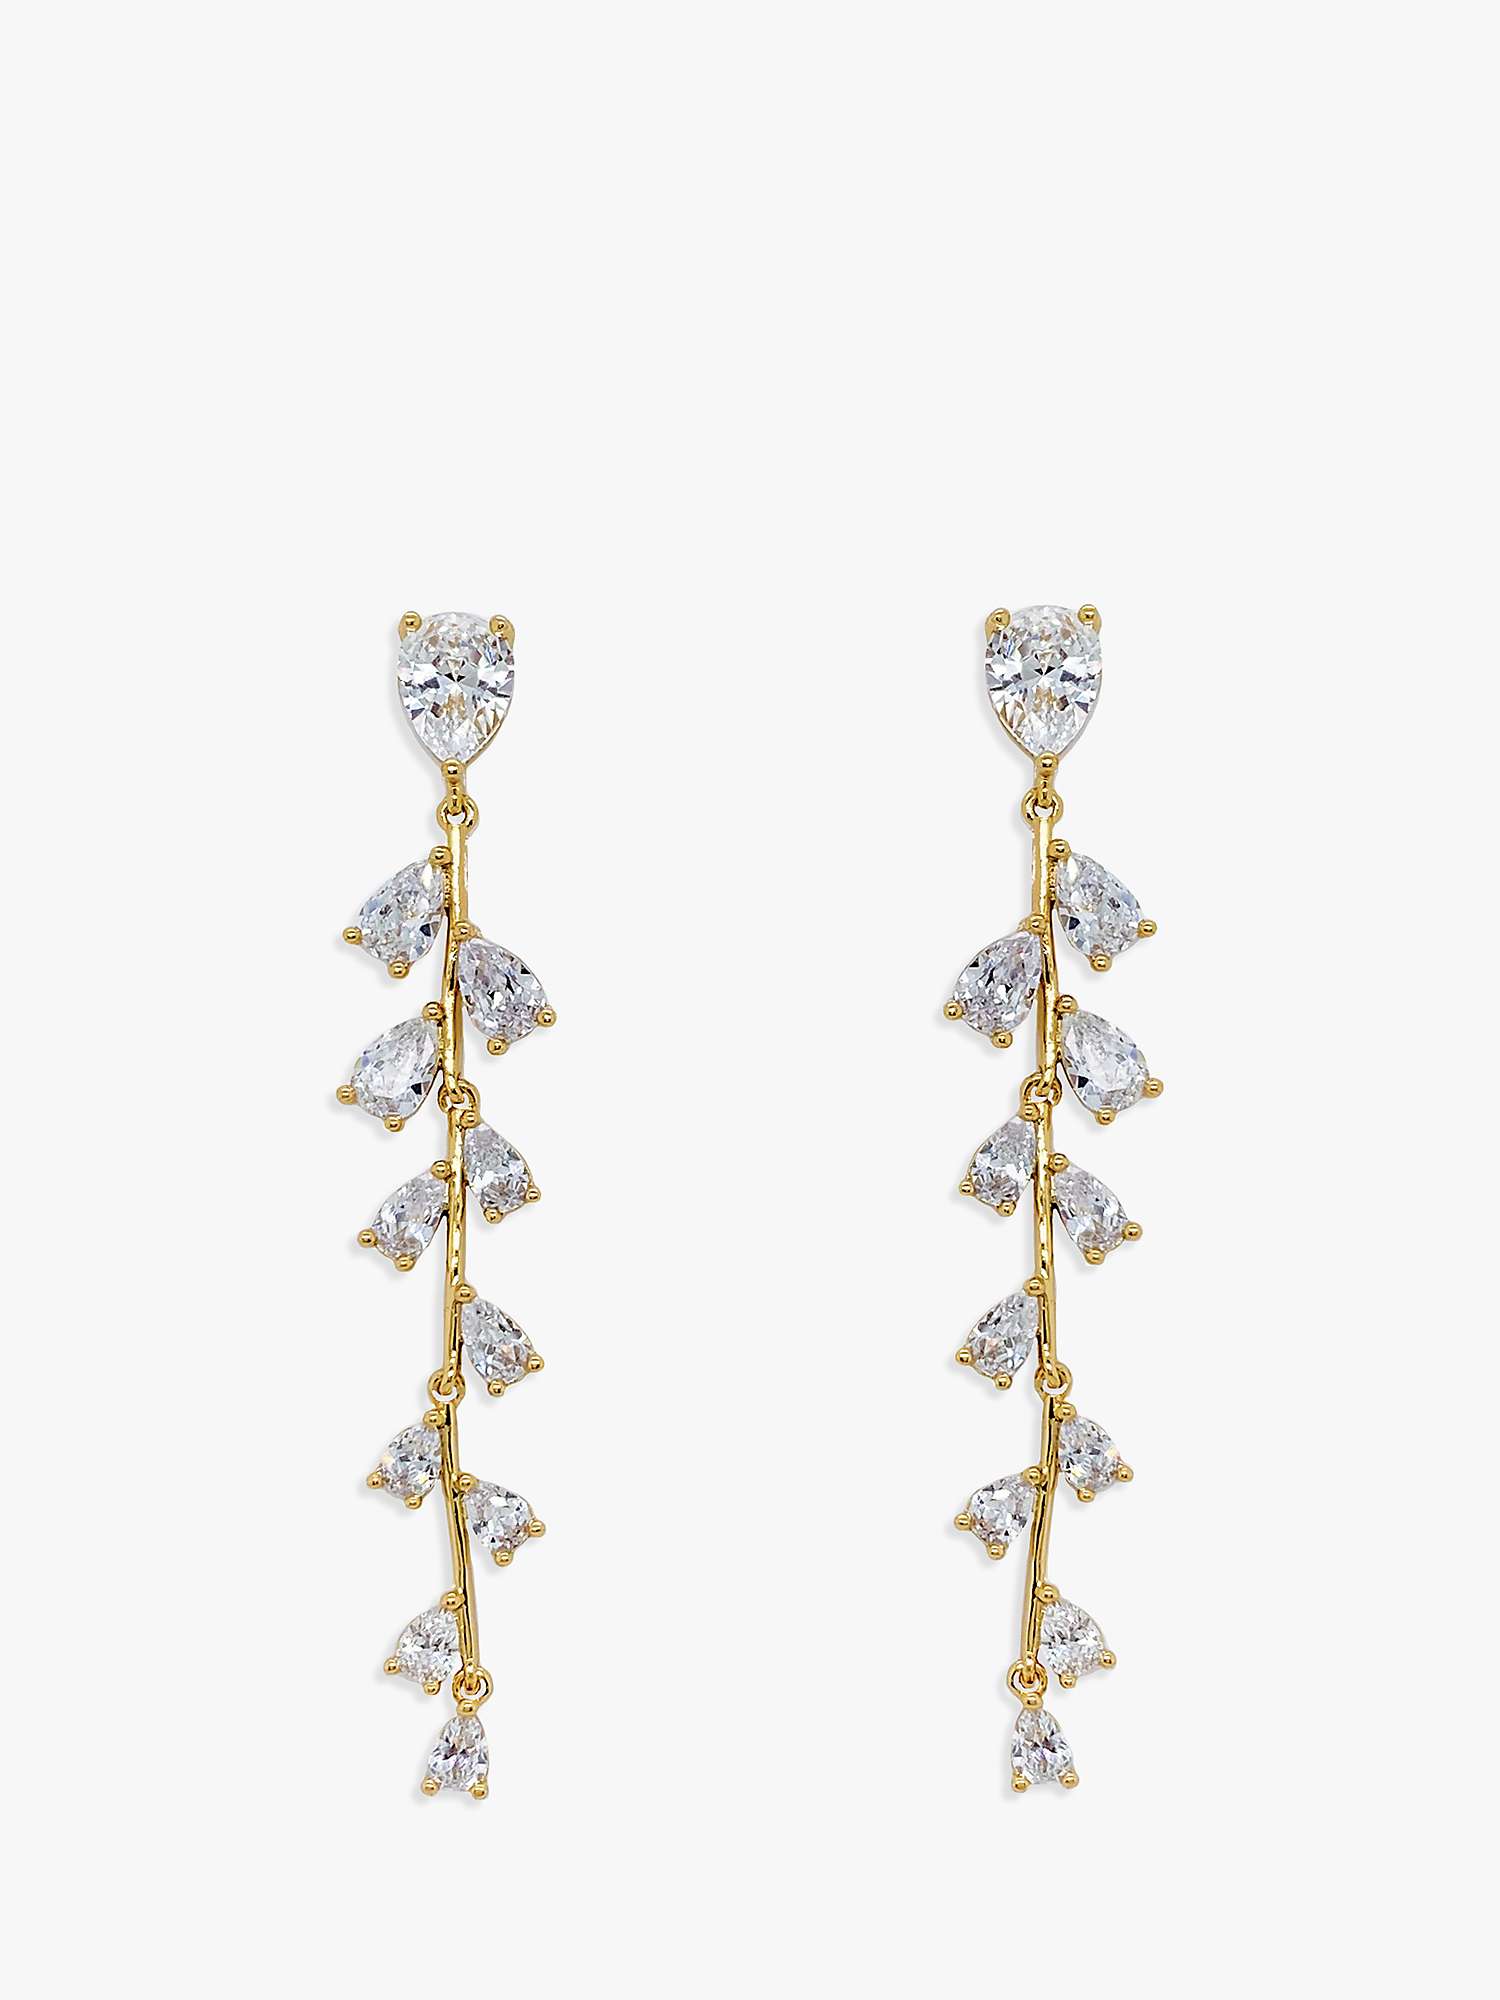 Buy Ivory & Co. Willow Drop Earrings, Gold Online at johnlewis.com